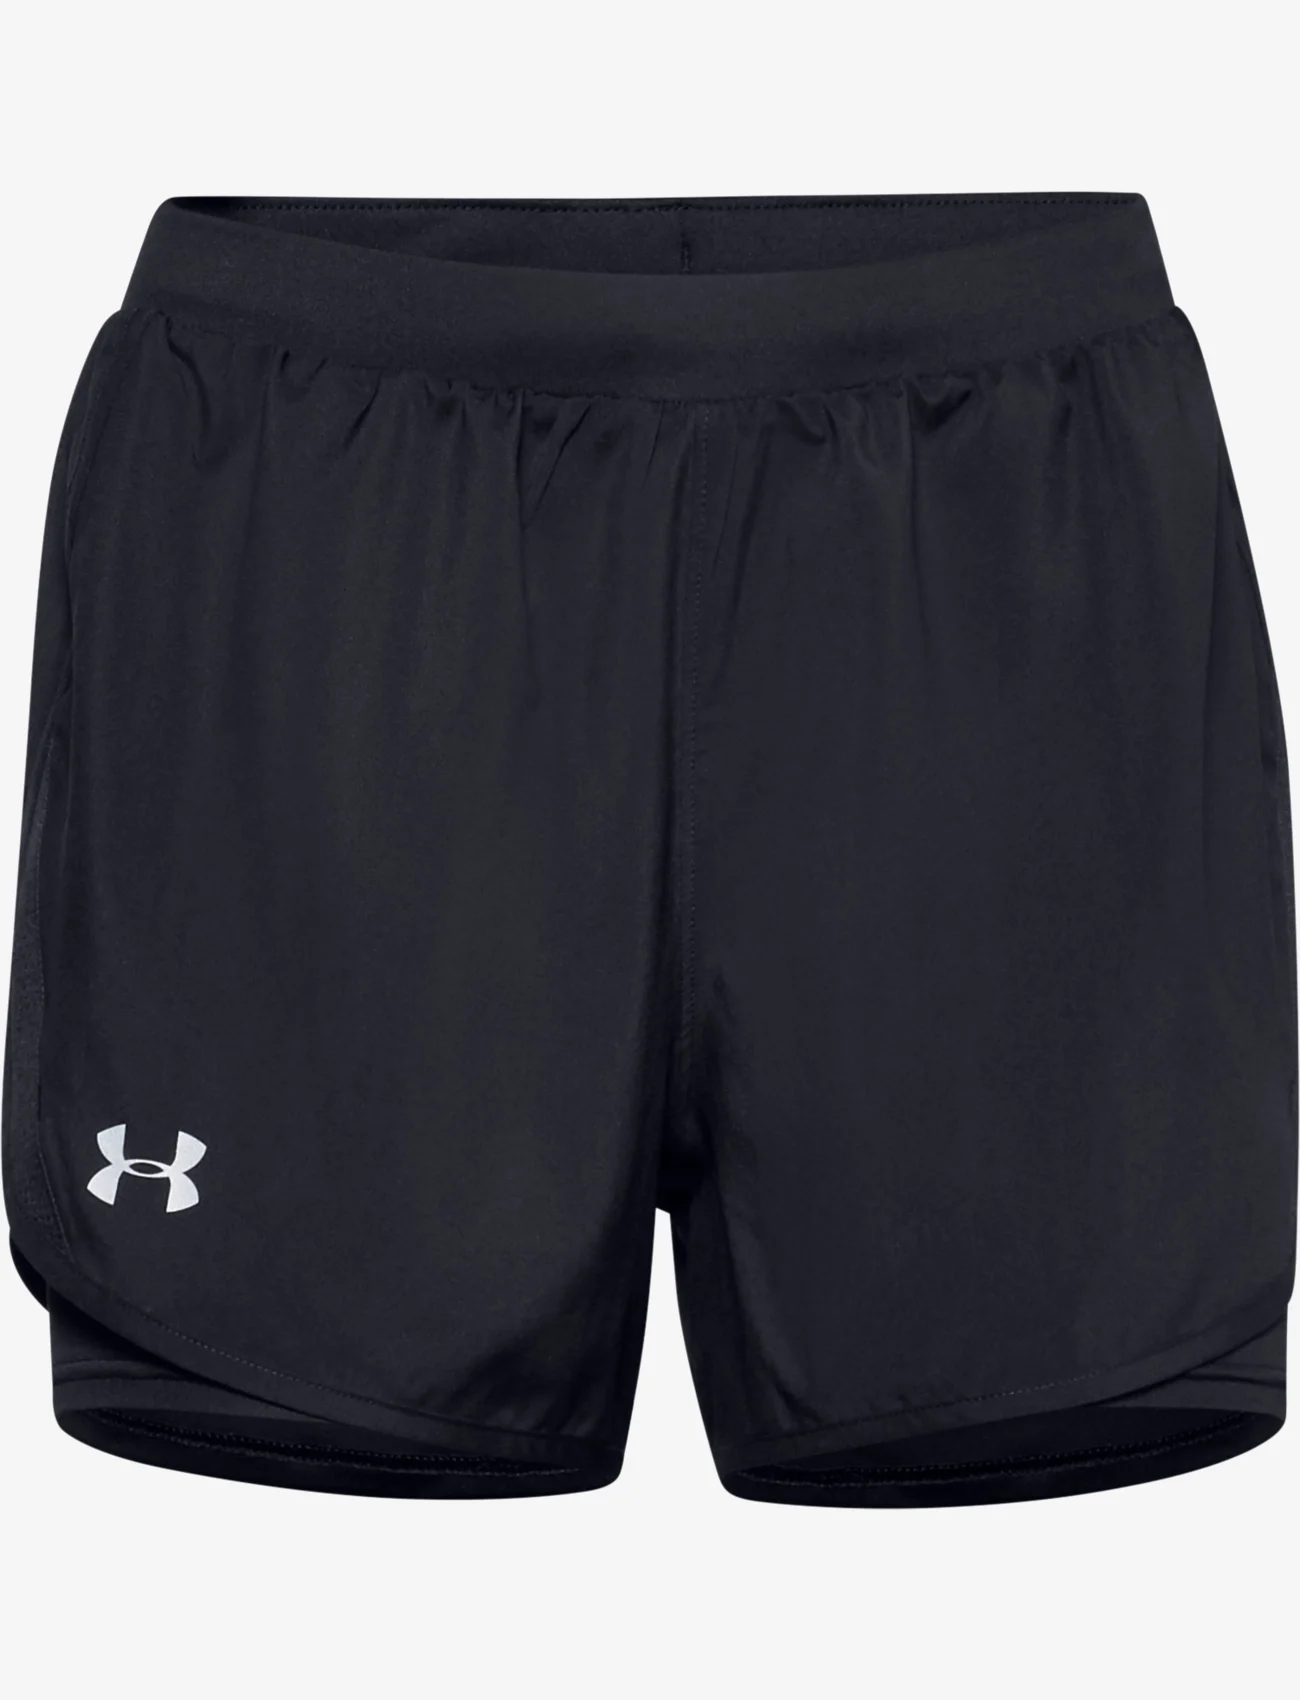 Under Armour - UA Fly By 2.0 2N1 Short - sports shorts - black - 0